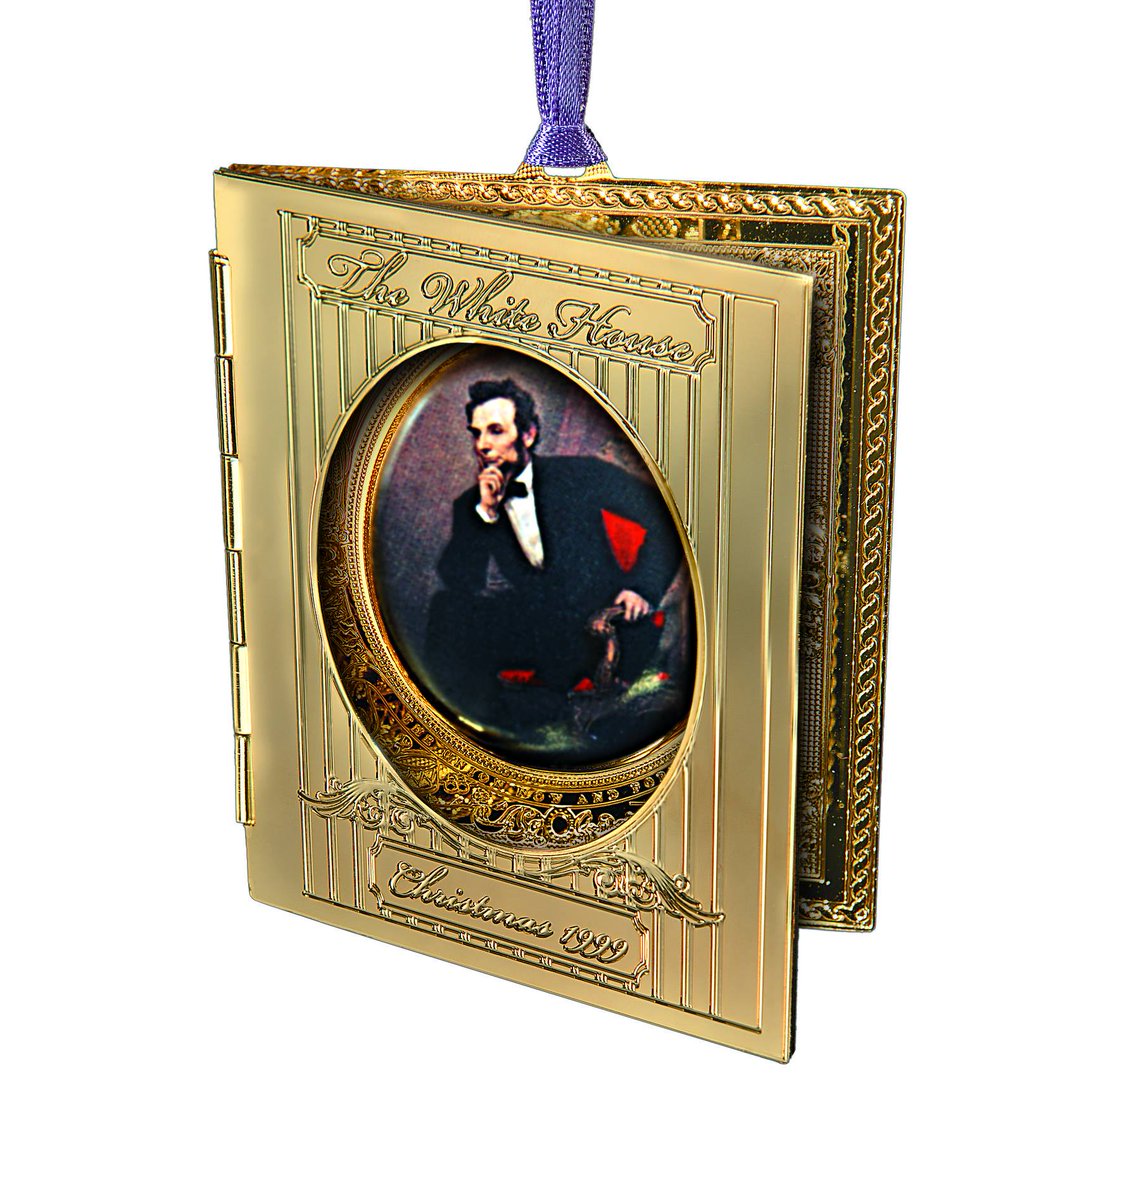 The 1999 ornament honors President Abraham Lincoln and features his official White House portrait by George P.A. Healy. Today, the painting hangs over the fireplace in the State Dining Room. https://shop.whitehousehistory.org/holidays/ornaments/1999-white-house-ornament-lincoln-s-portrait-honoring-abraham-lincoln-16th-president-of-the-united-states-1860-1865